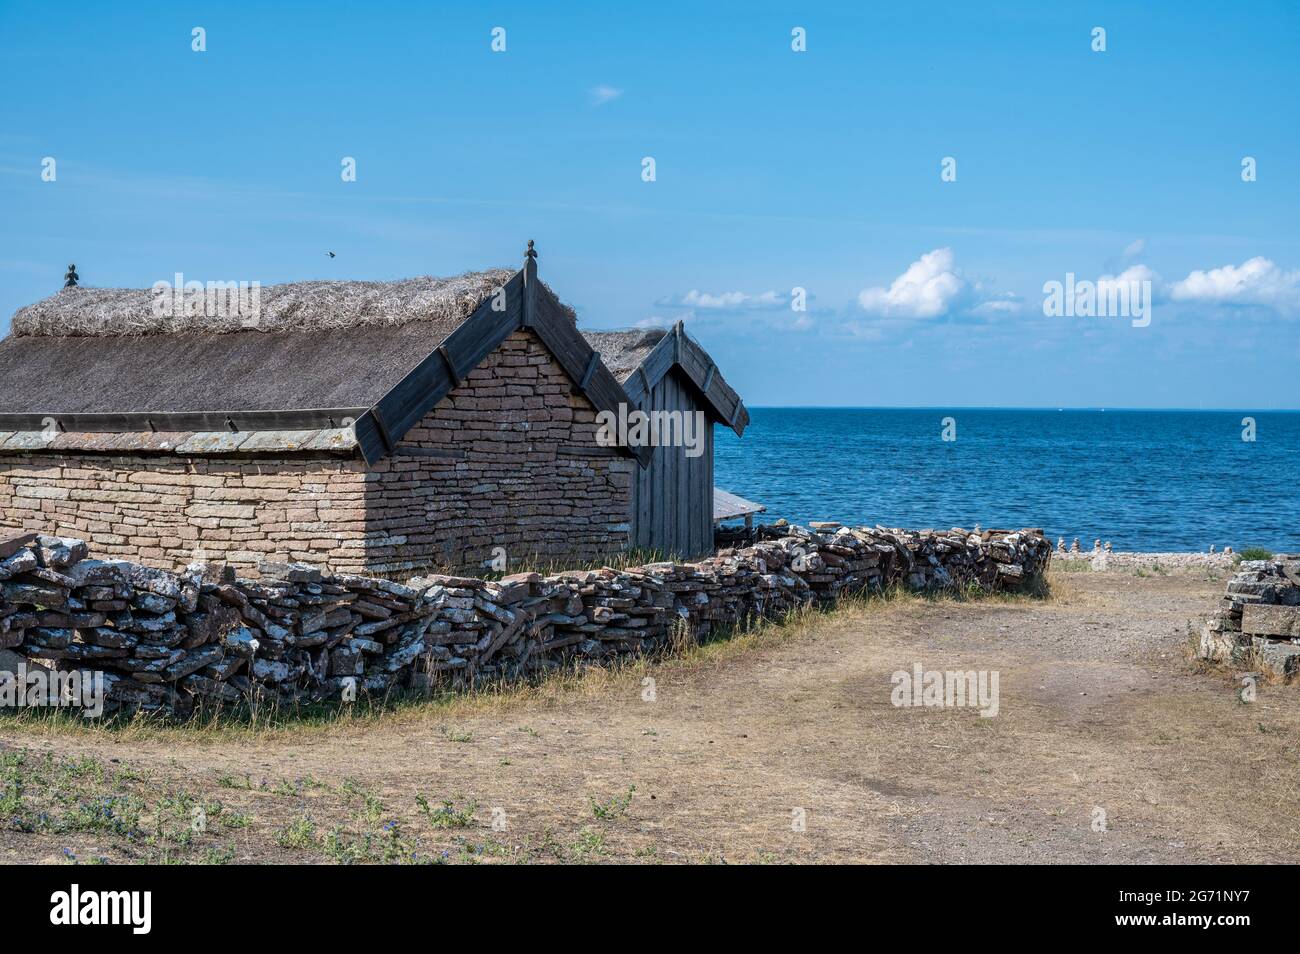 Characteristic landscape on the northwest coast of Swedish Baltic Sea island Öland. This tourist destination known as the island of sun and wind. Stock Photo